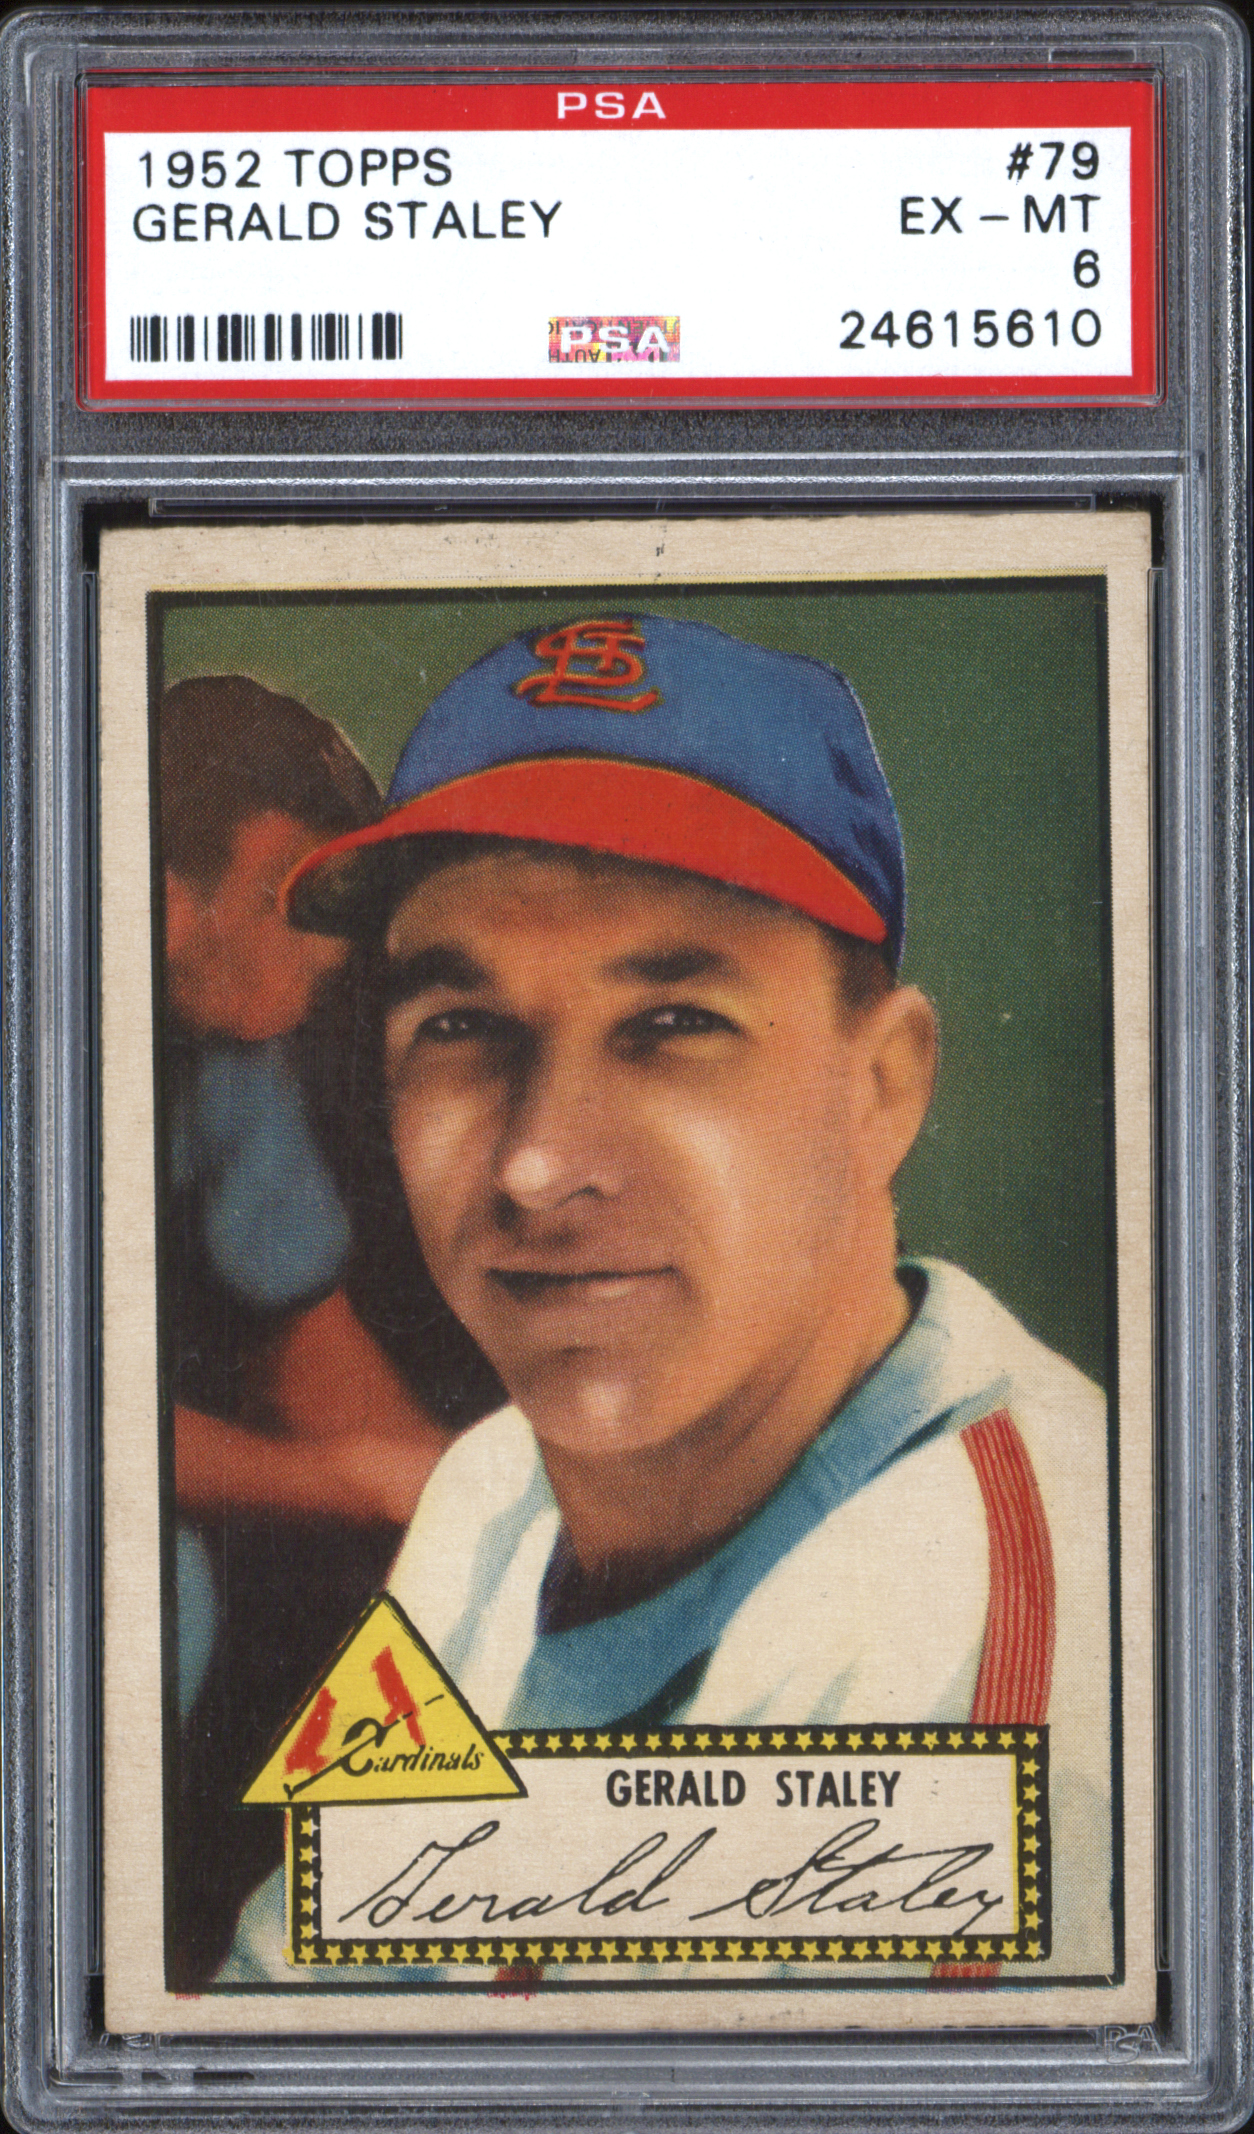  1952 Topps #79 Gerry Staley (Red Back) - PSA EX-MT 6